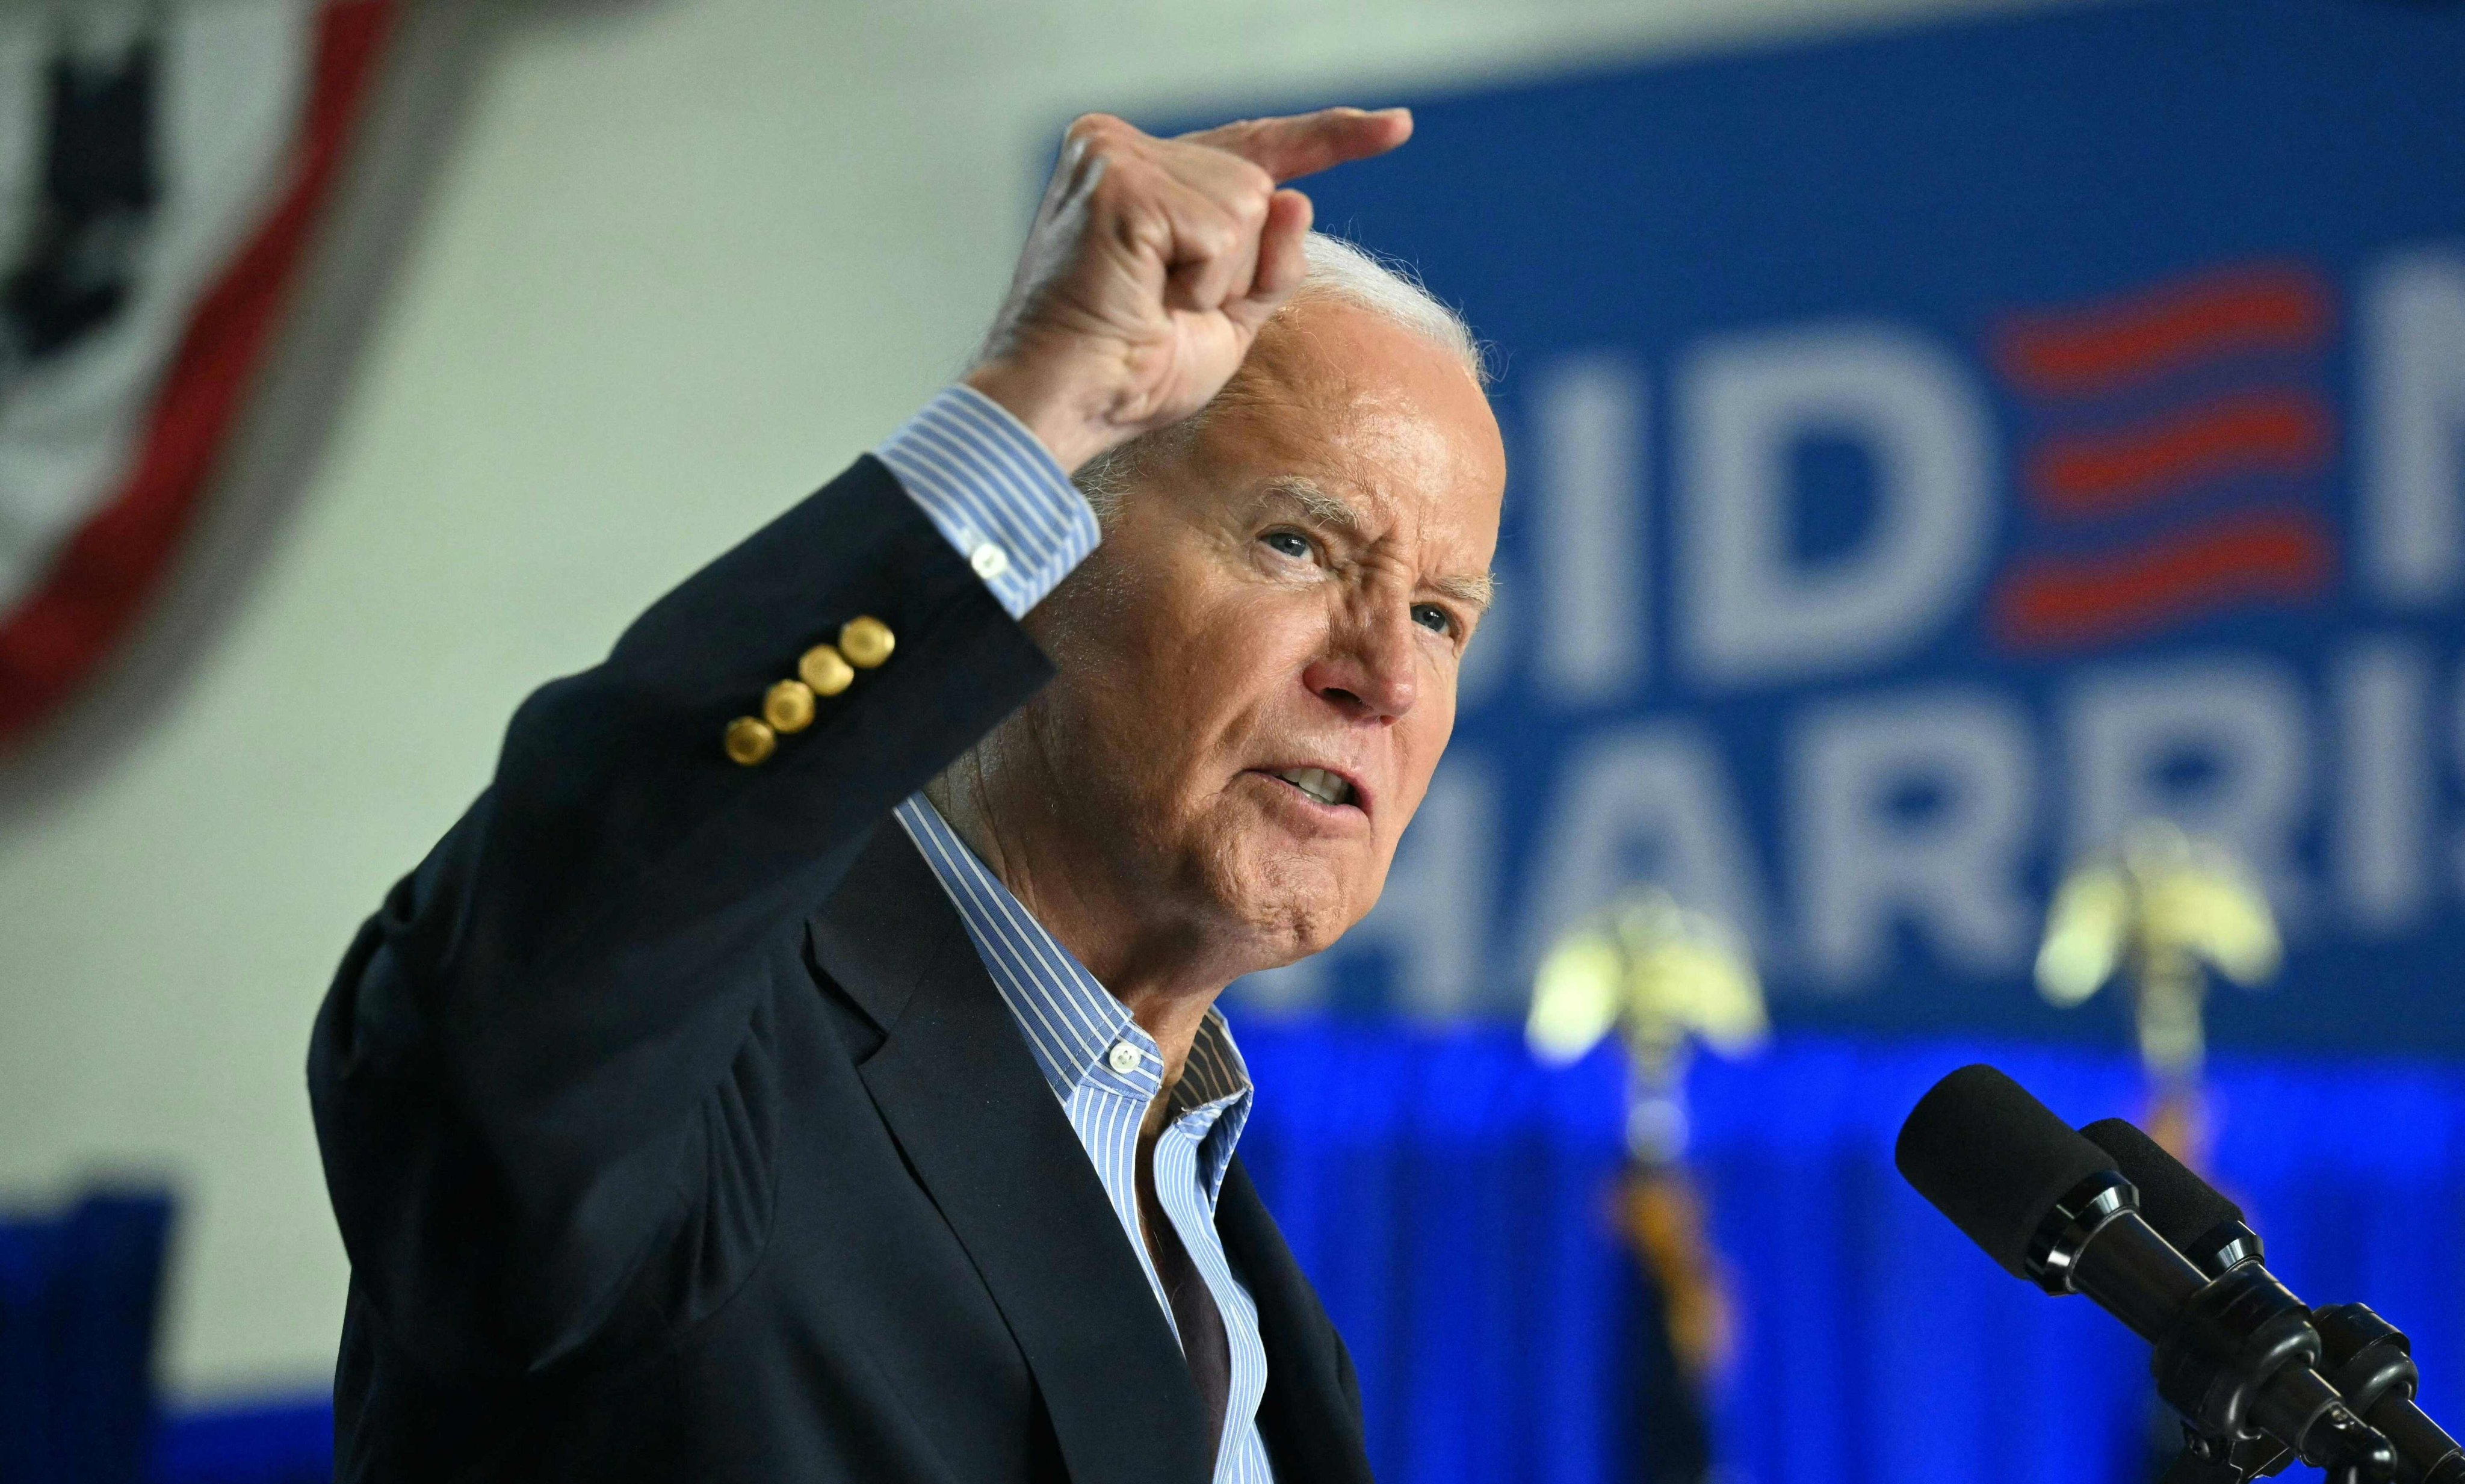 US President Joe Biden during a campaign event in Madison, Wisconsin, on Friday. Photo: AFP